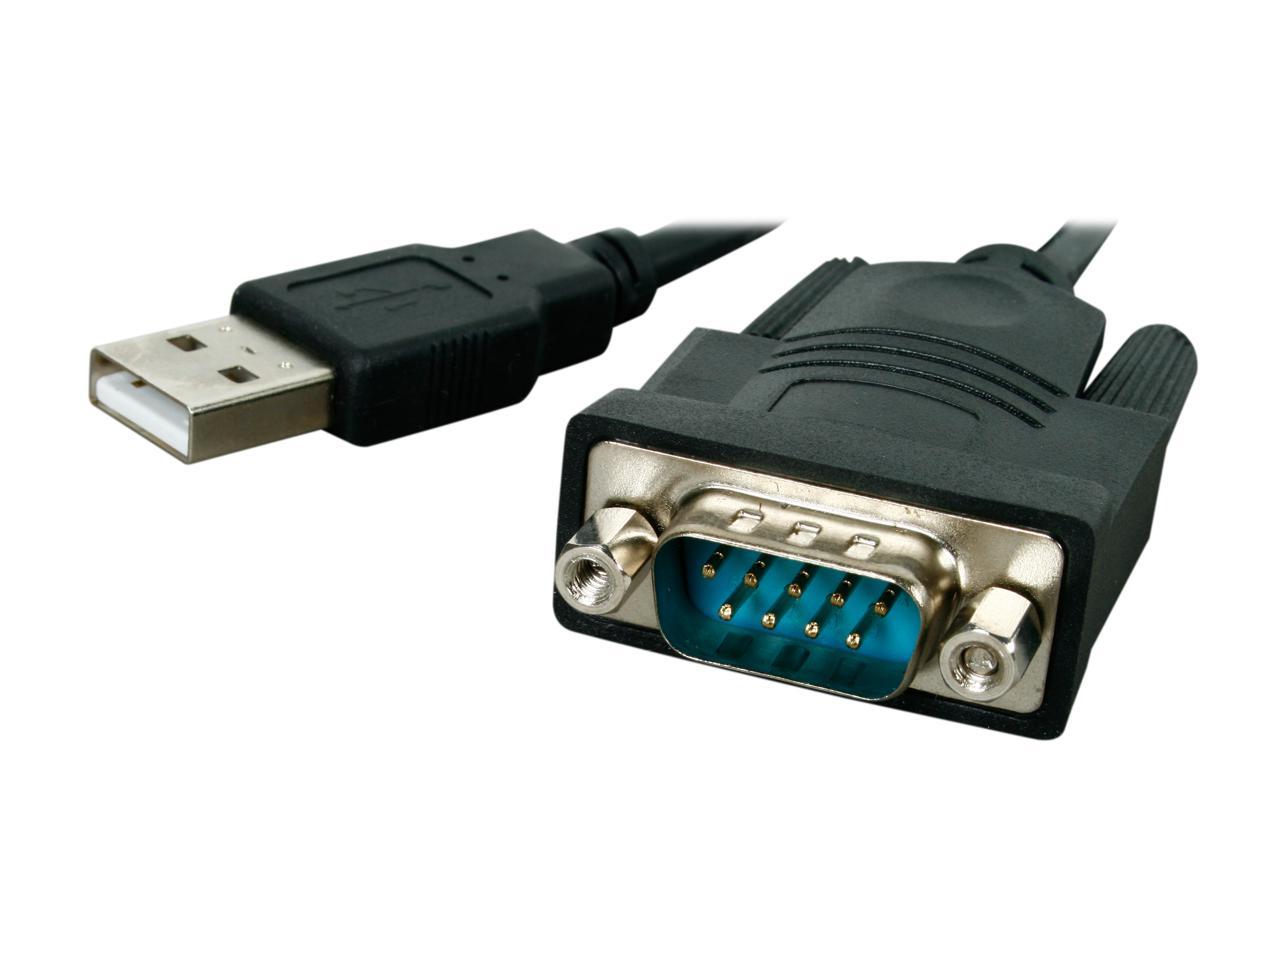 prolific usb to serial comm port